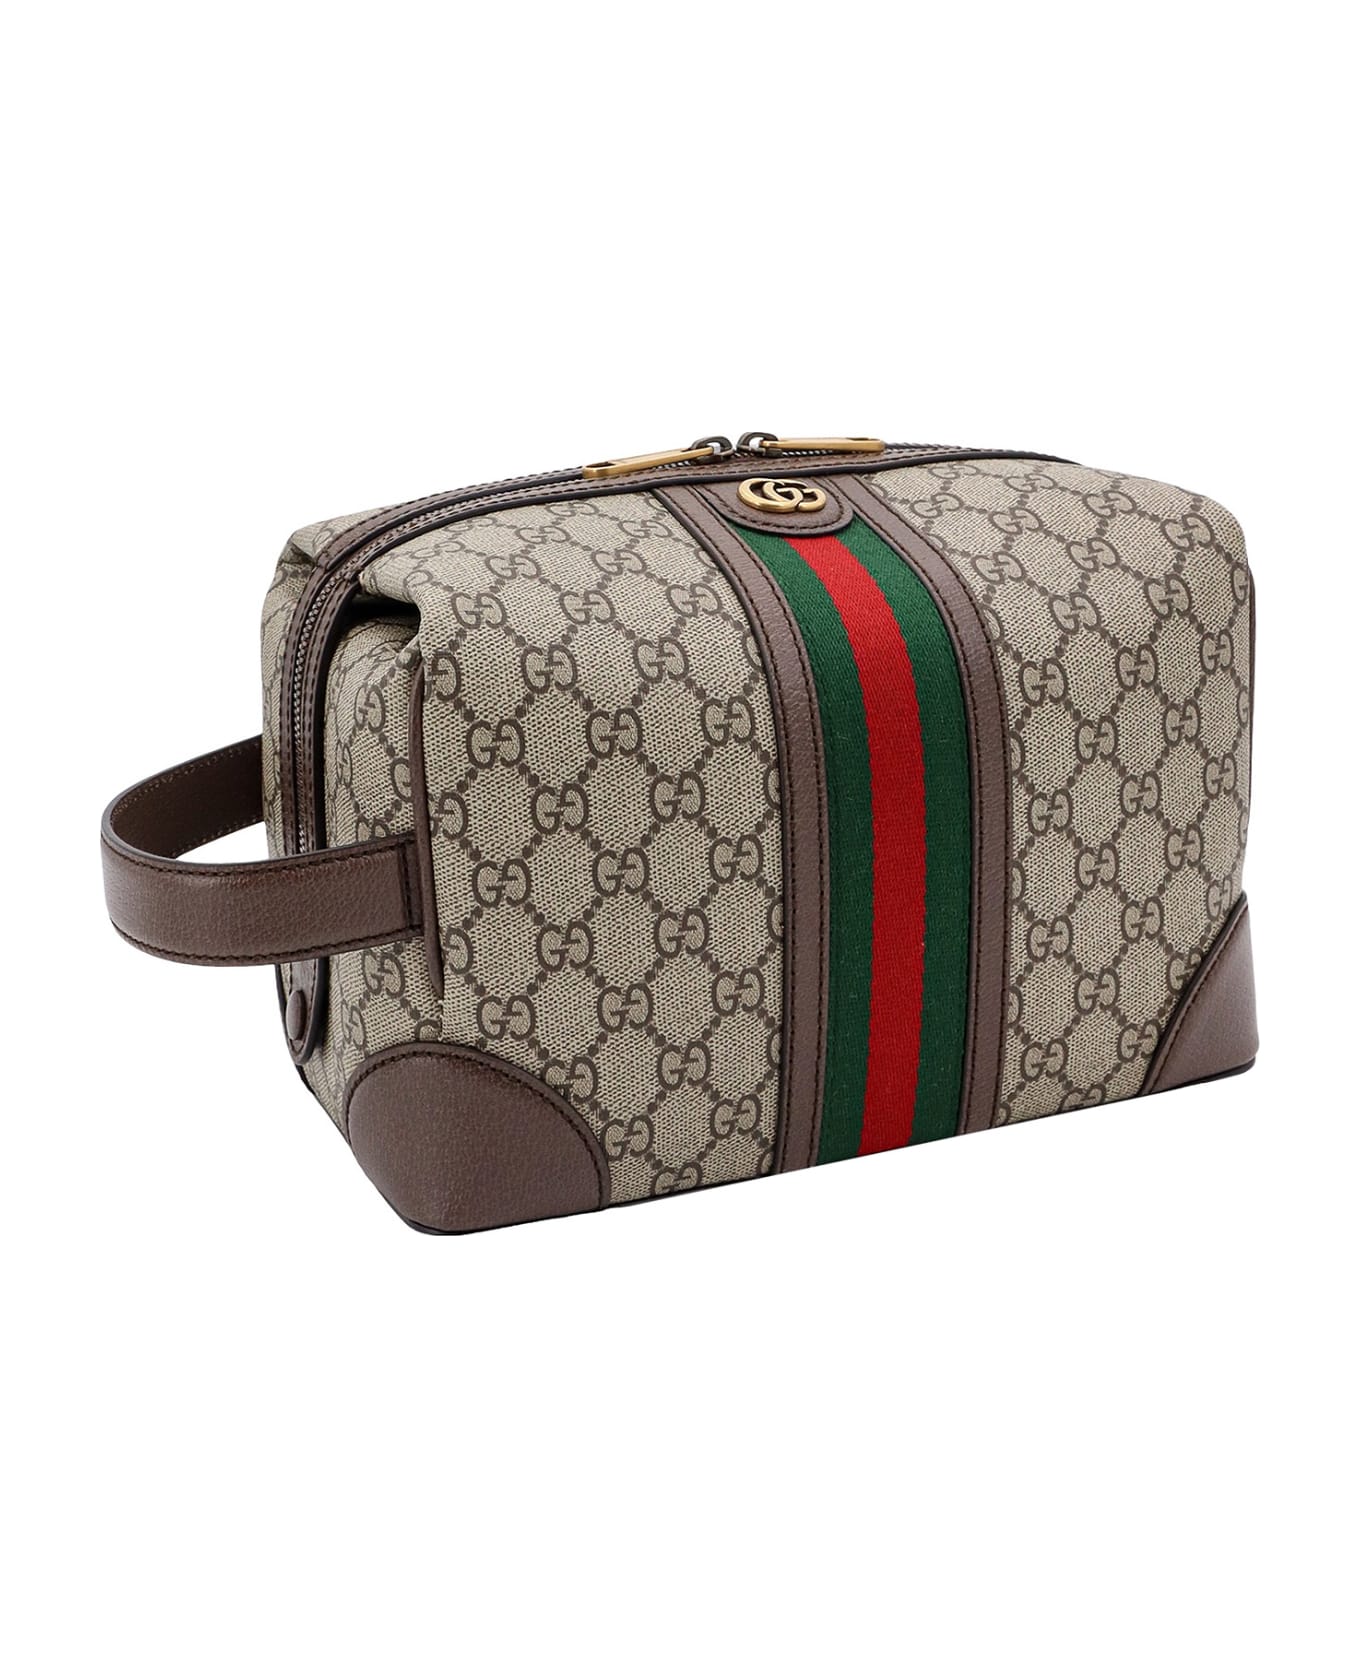 Gucci Savoy Beauty Case - Brown トラベルバッグ